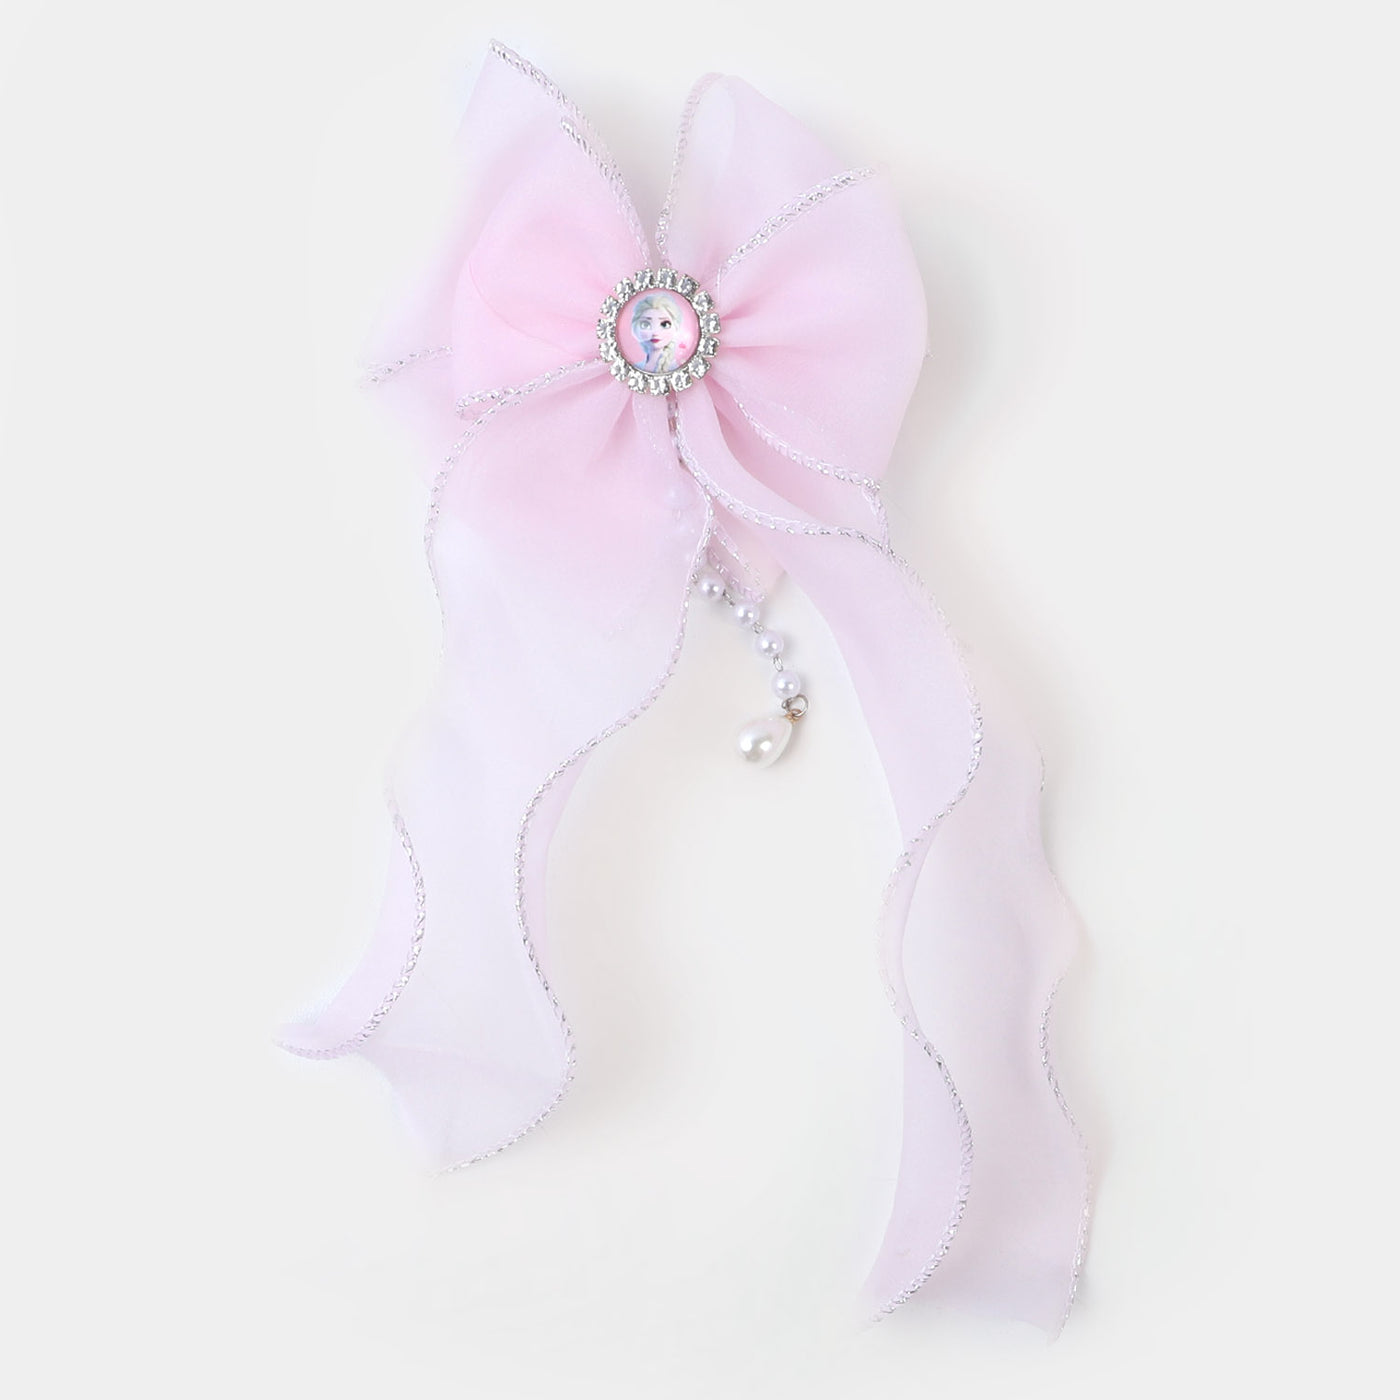 Fancy Bow Style Hair Pin For Girls